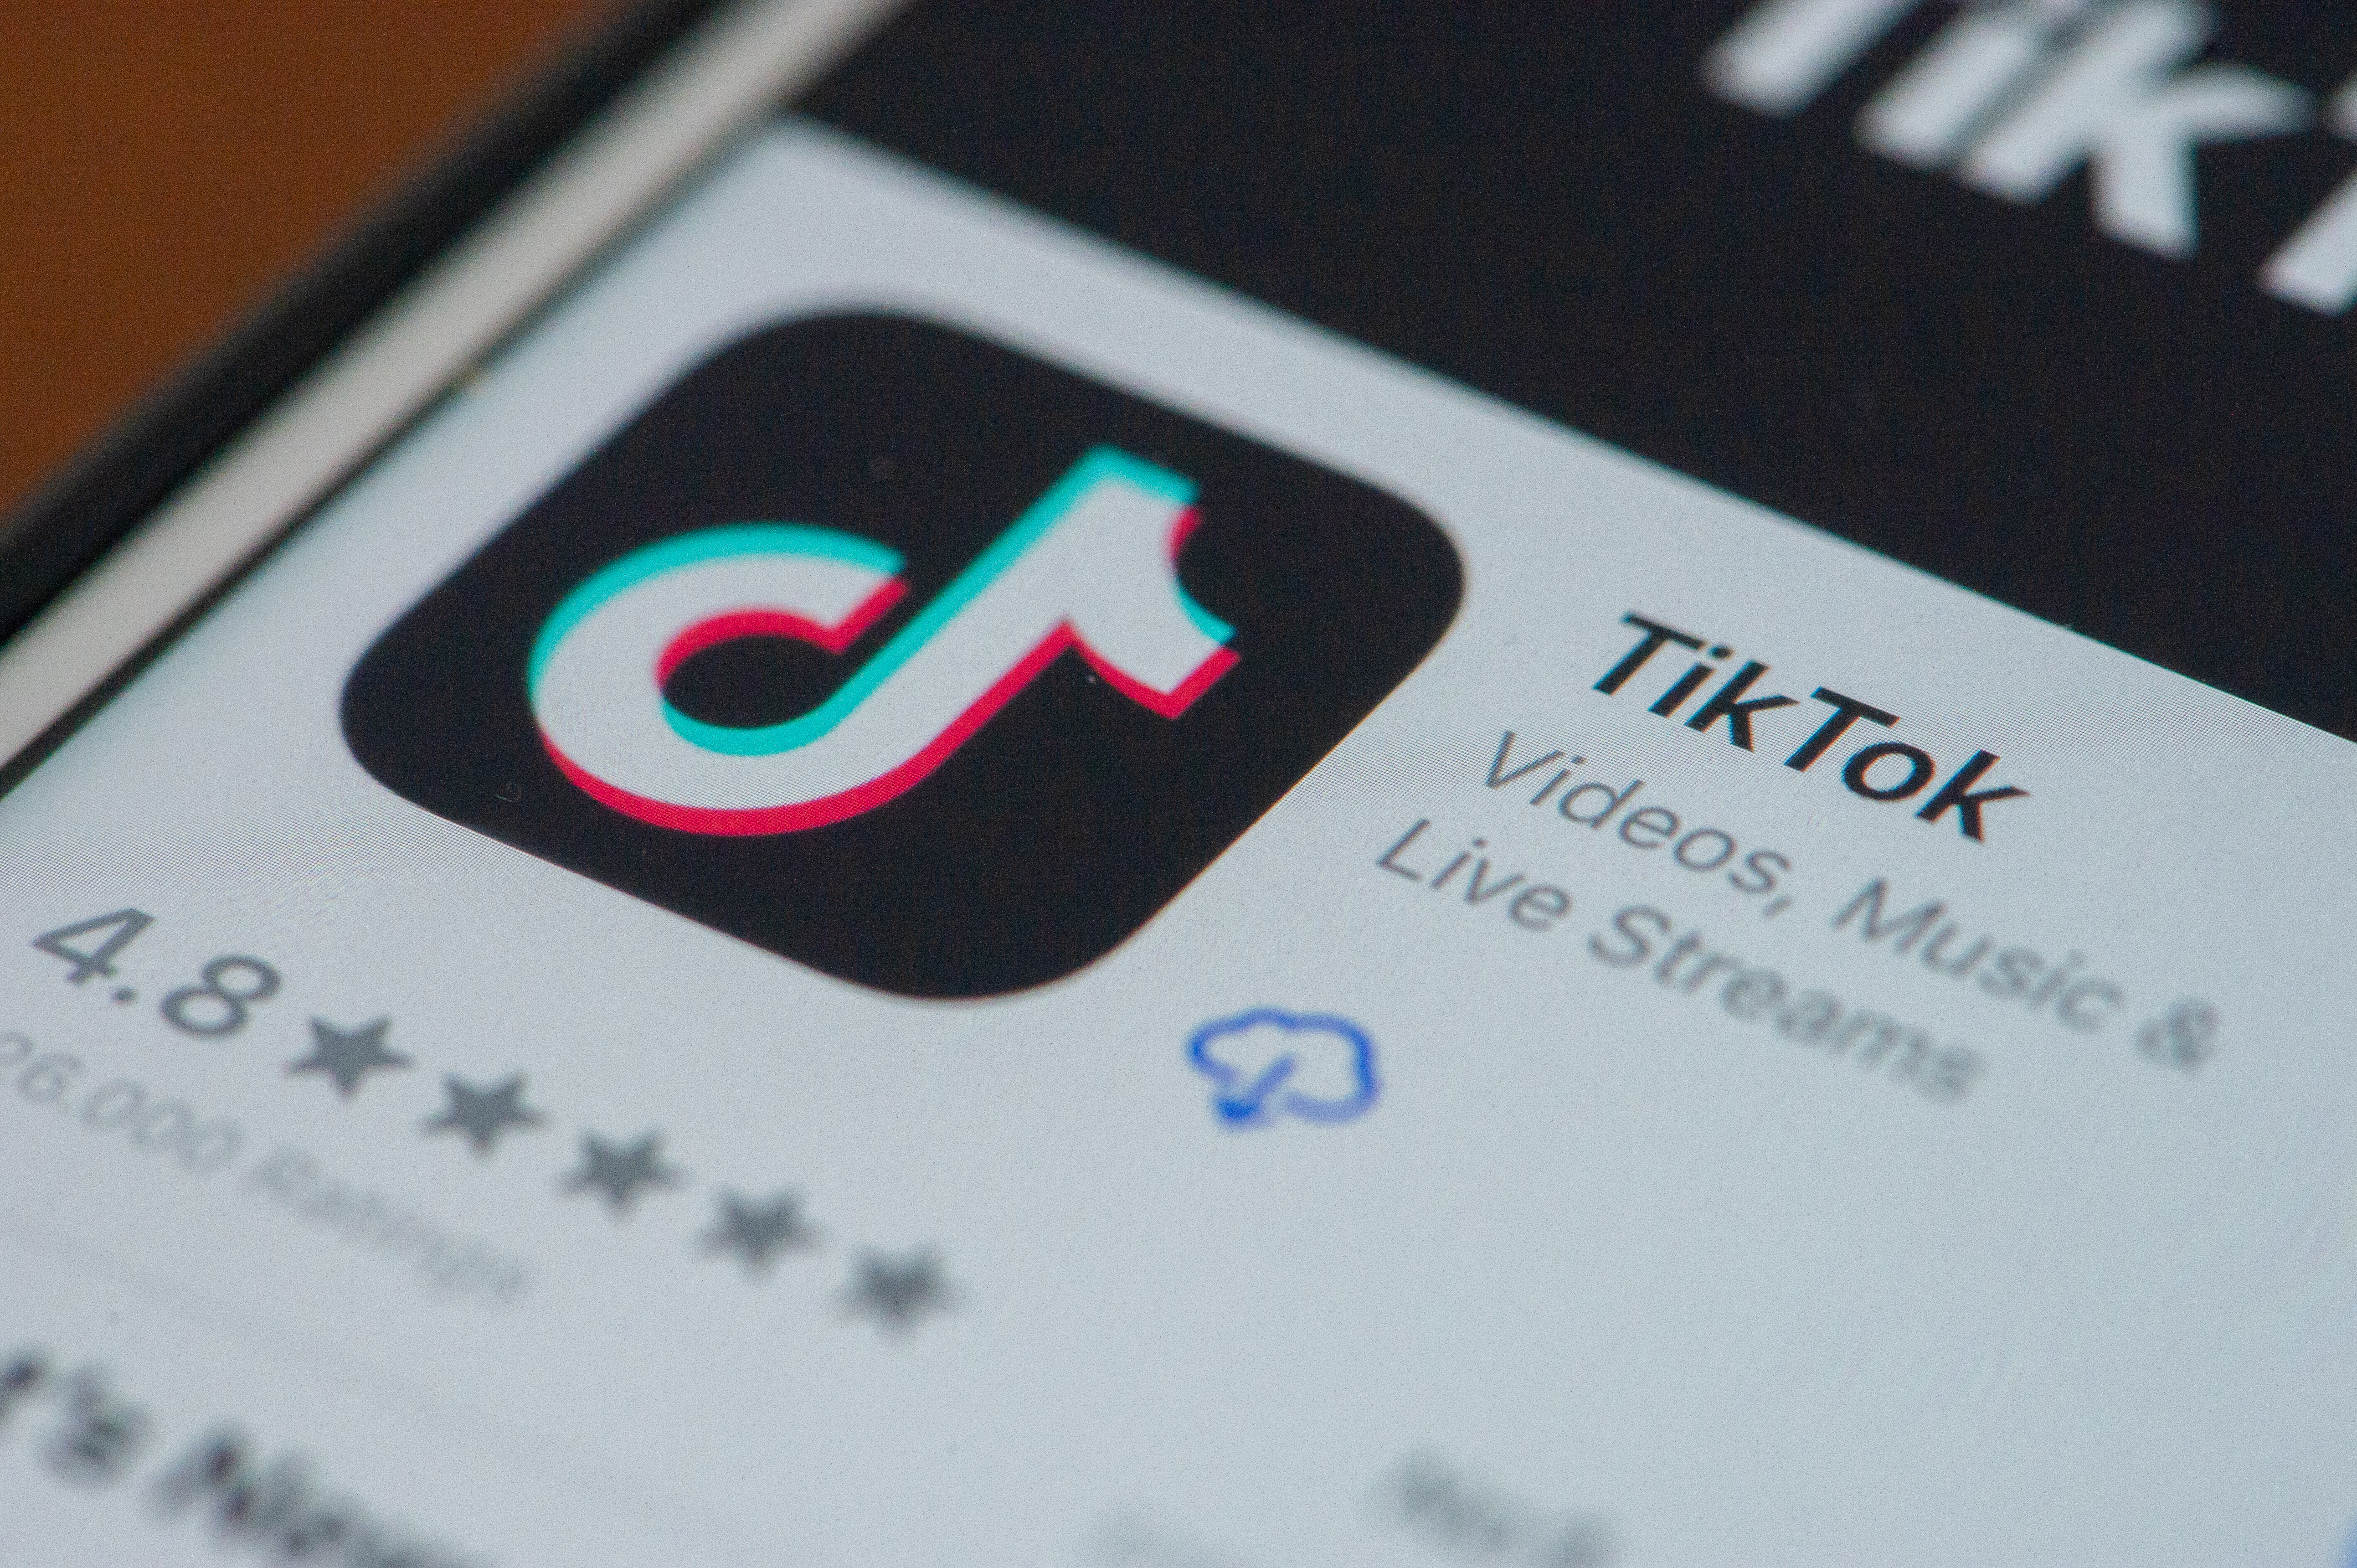 TikTok's new CEO is an executive from its parent company